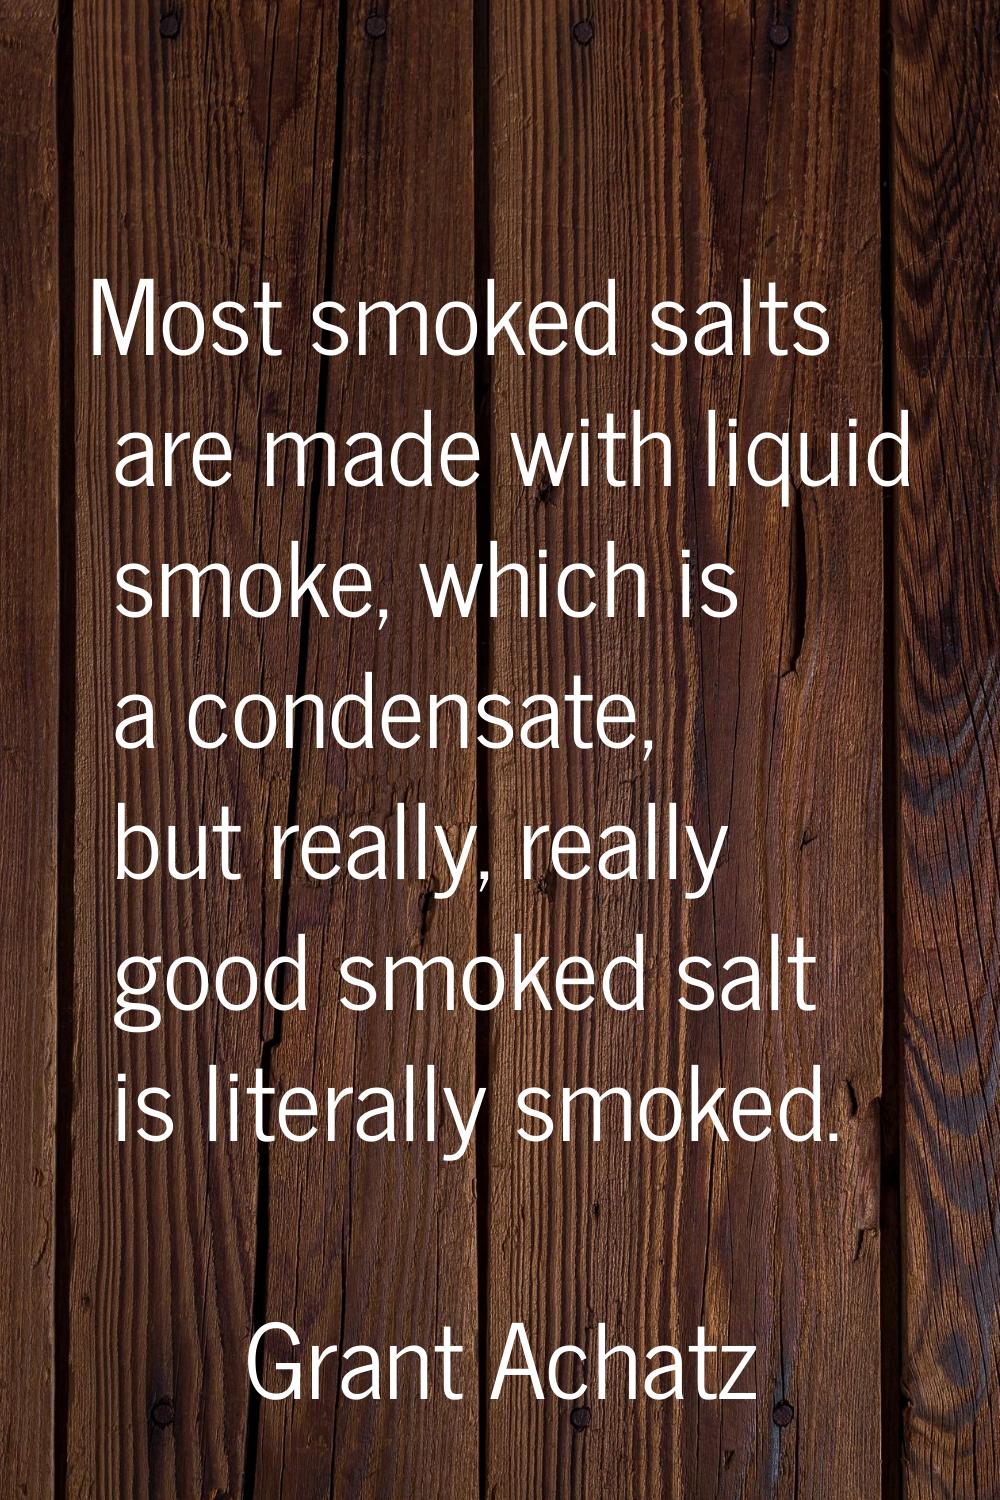 Most smoked salts are made with liquid smoke, which is a condensate, but really, really good smoked